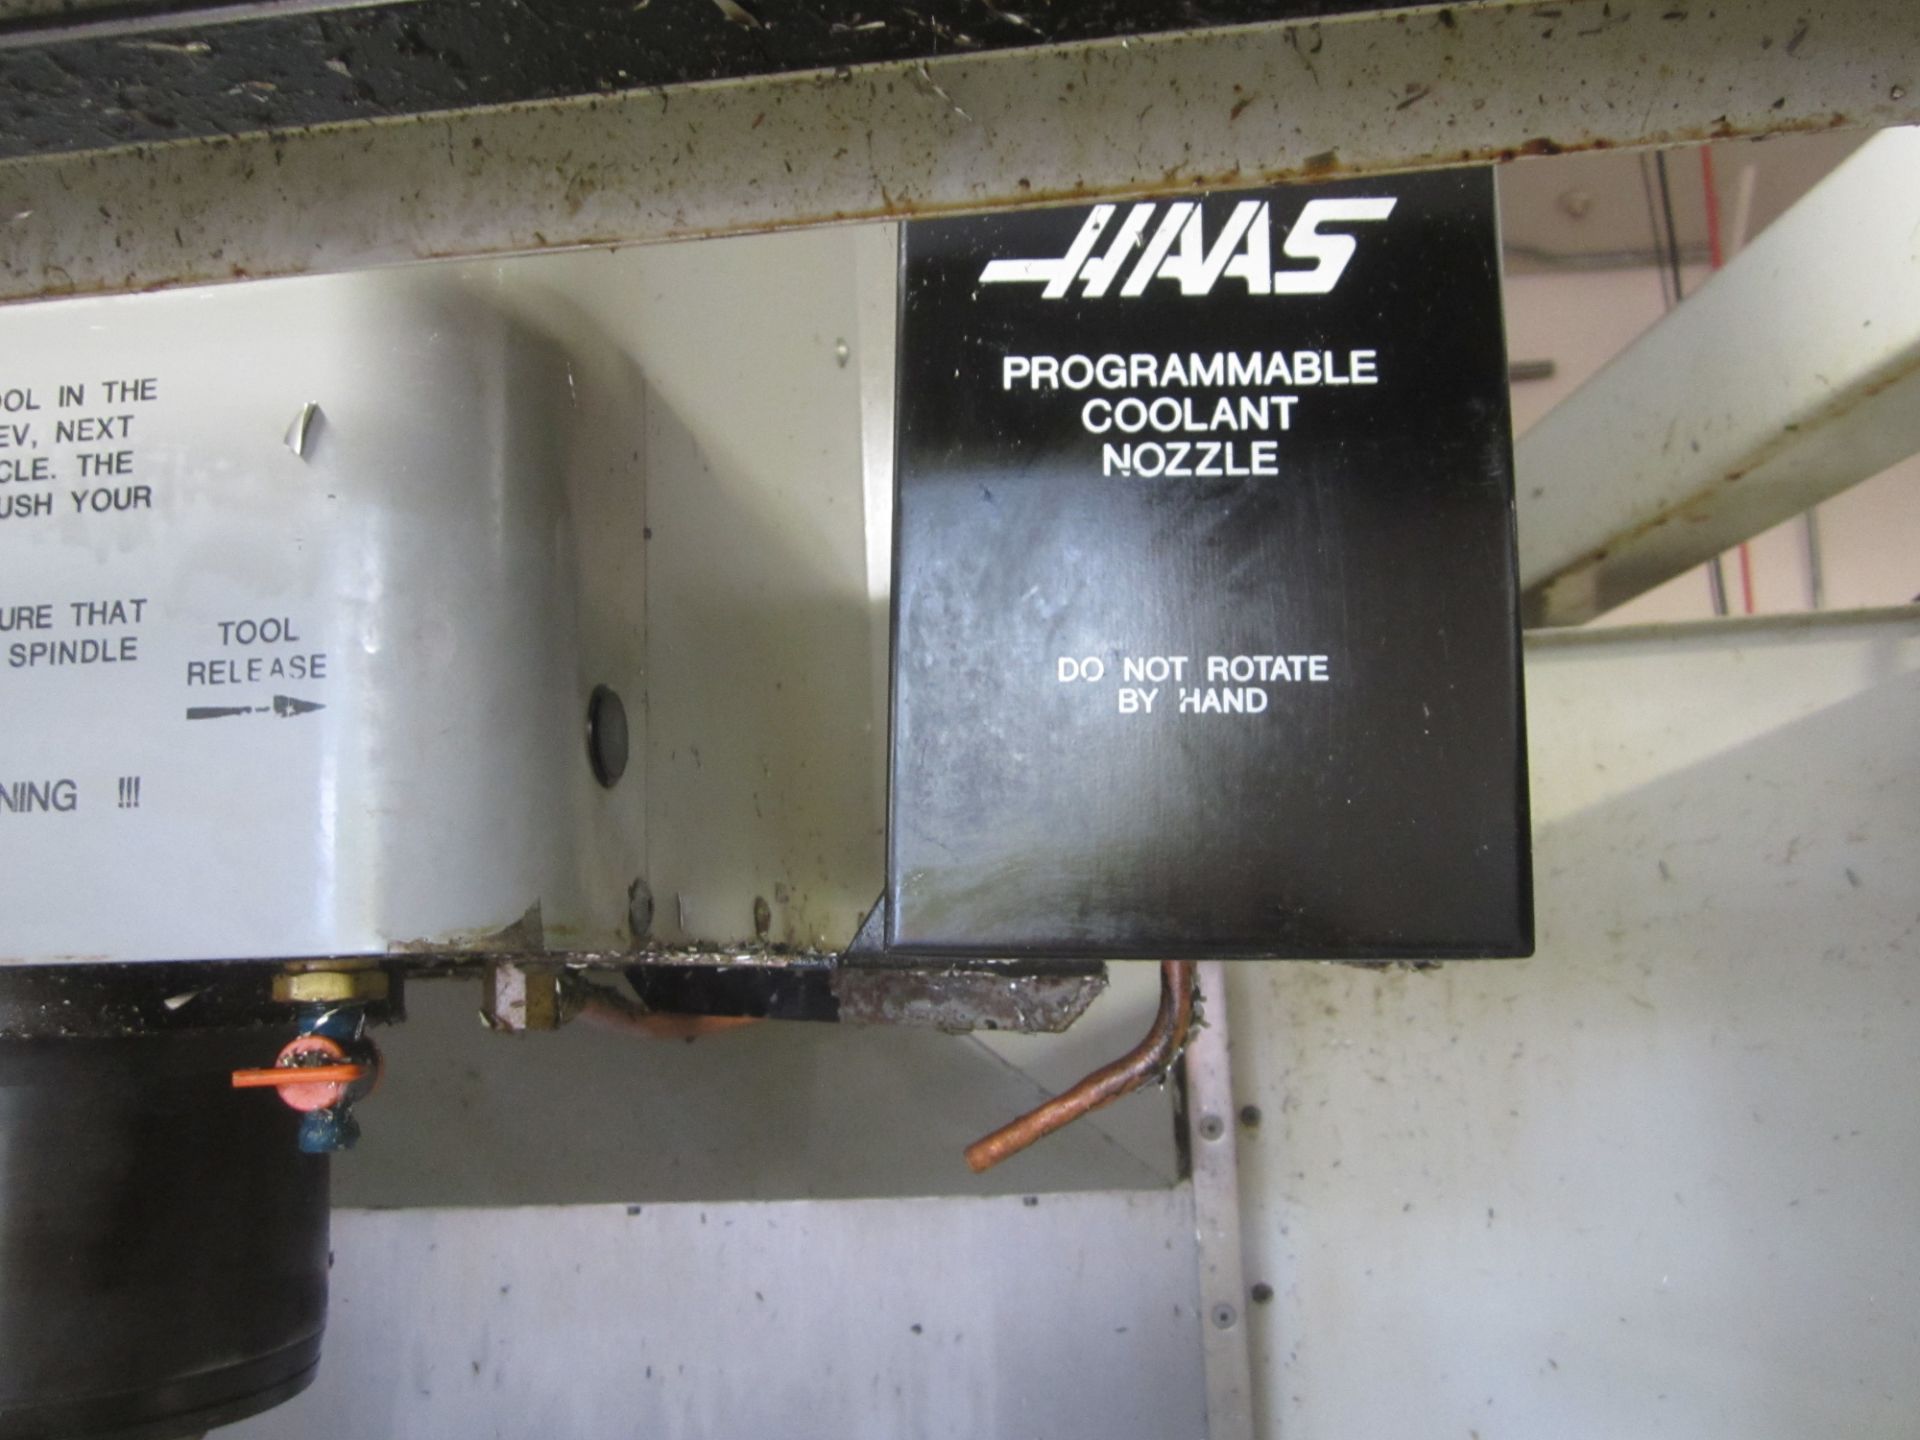 Haas VF-4 CNC Vertical Machining Center, s/n 20228, New 2000, Haas CNC Control, 20 HP, 40 Taper, - Image 10 of 16